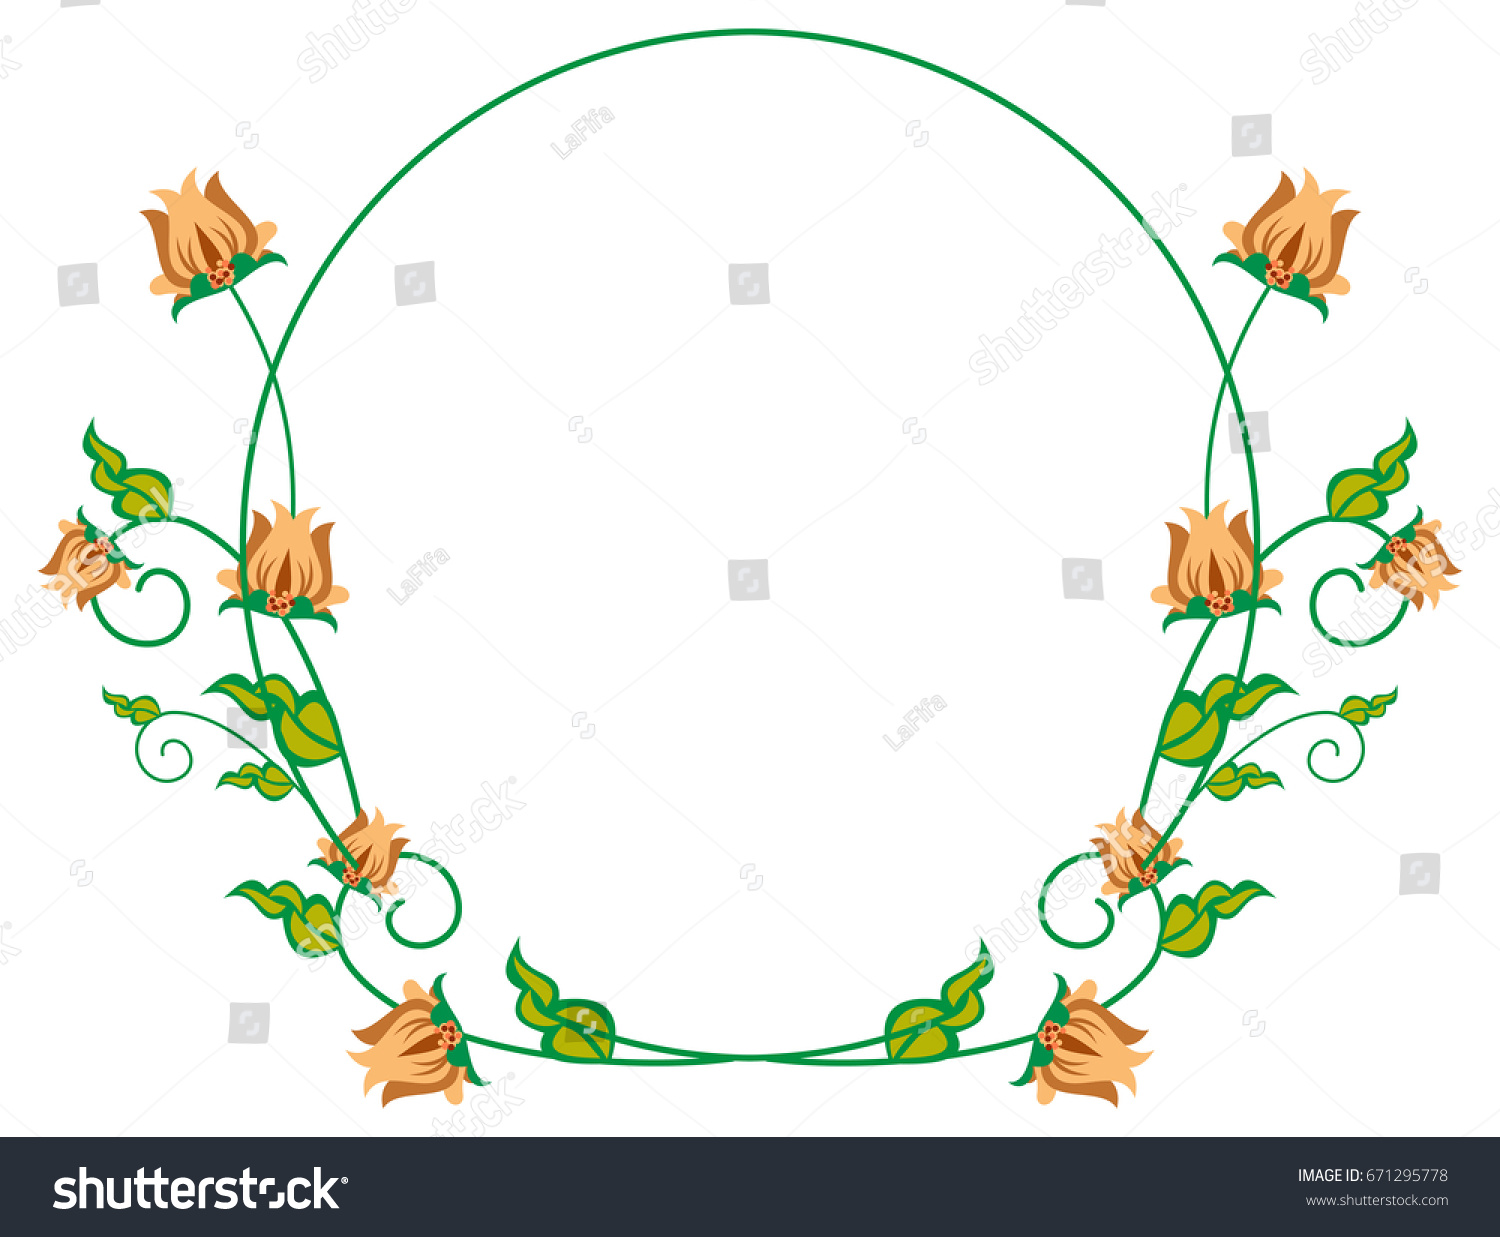 Round Decorative Frame Abstract Flowers Vector Stock Vector 671295778